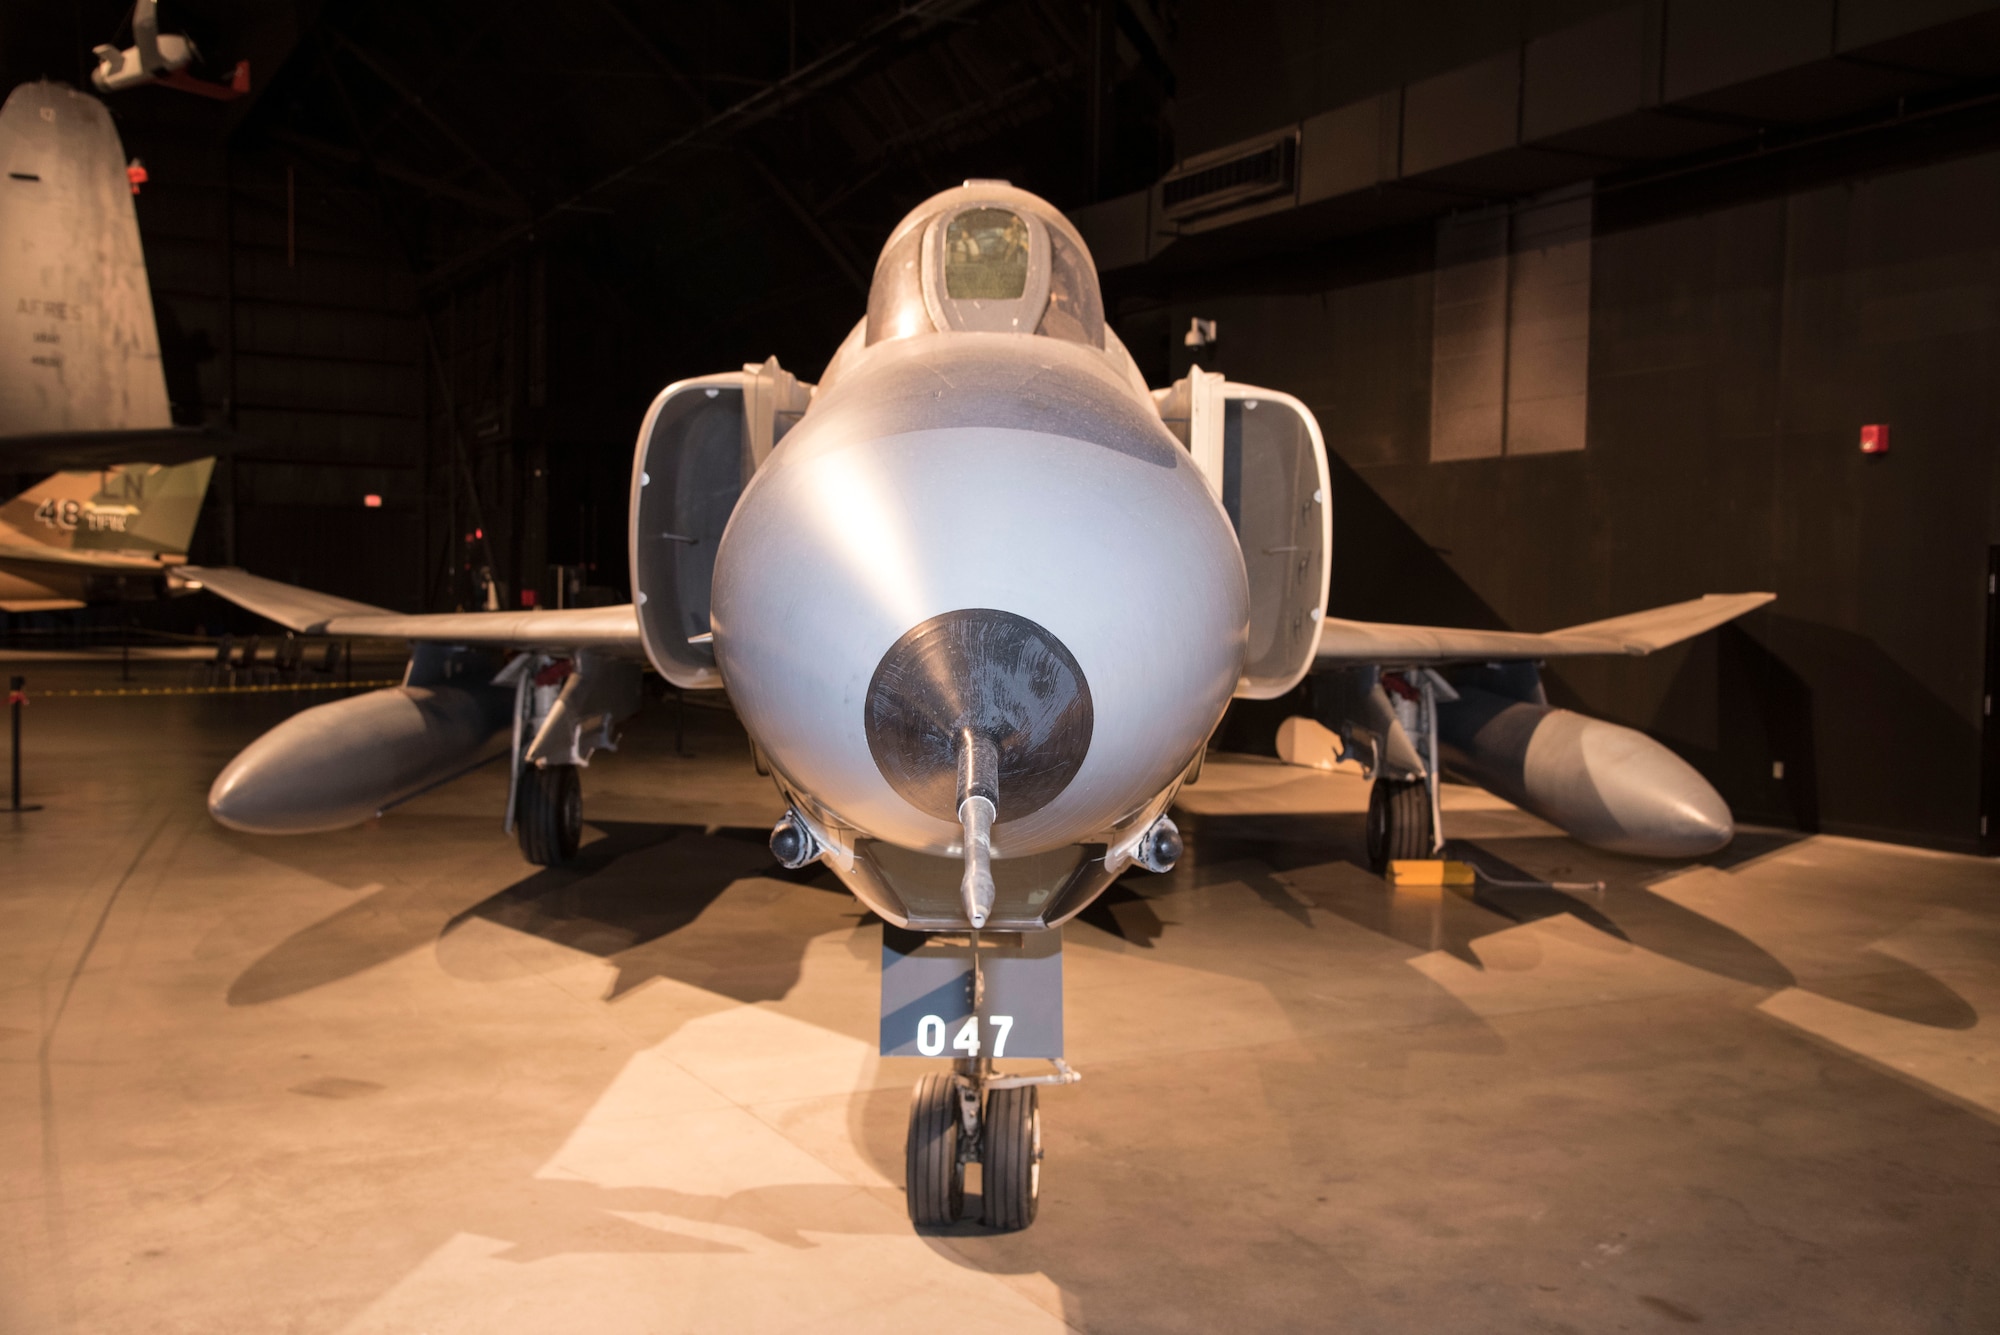 DAYTON, Ohio -- McDonnell Douglas RF-4C Phantom II in the Cold War Gallery at the National Museum of the United States Air Force. (U.S. Air Force photo by Ken LaRock)